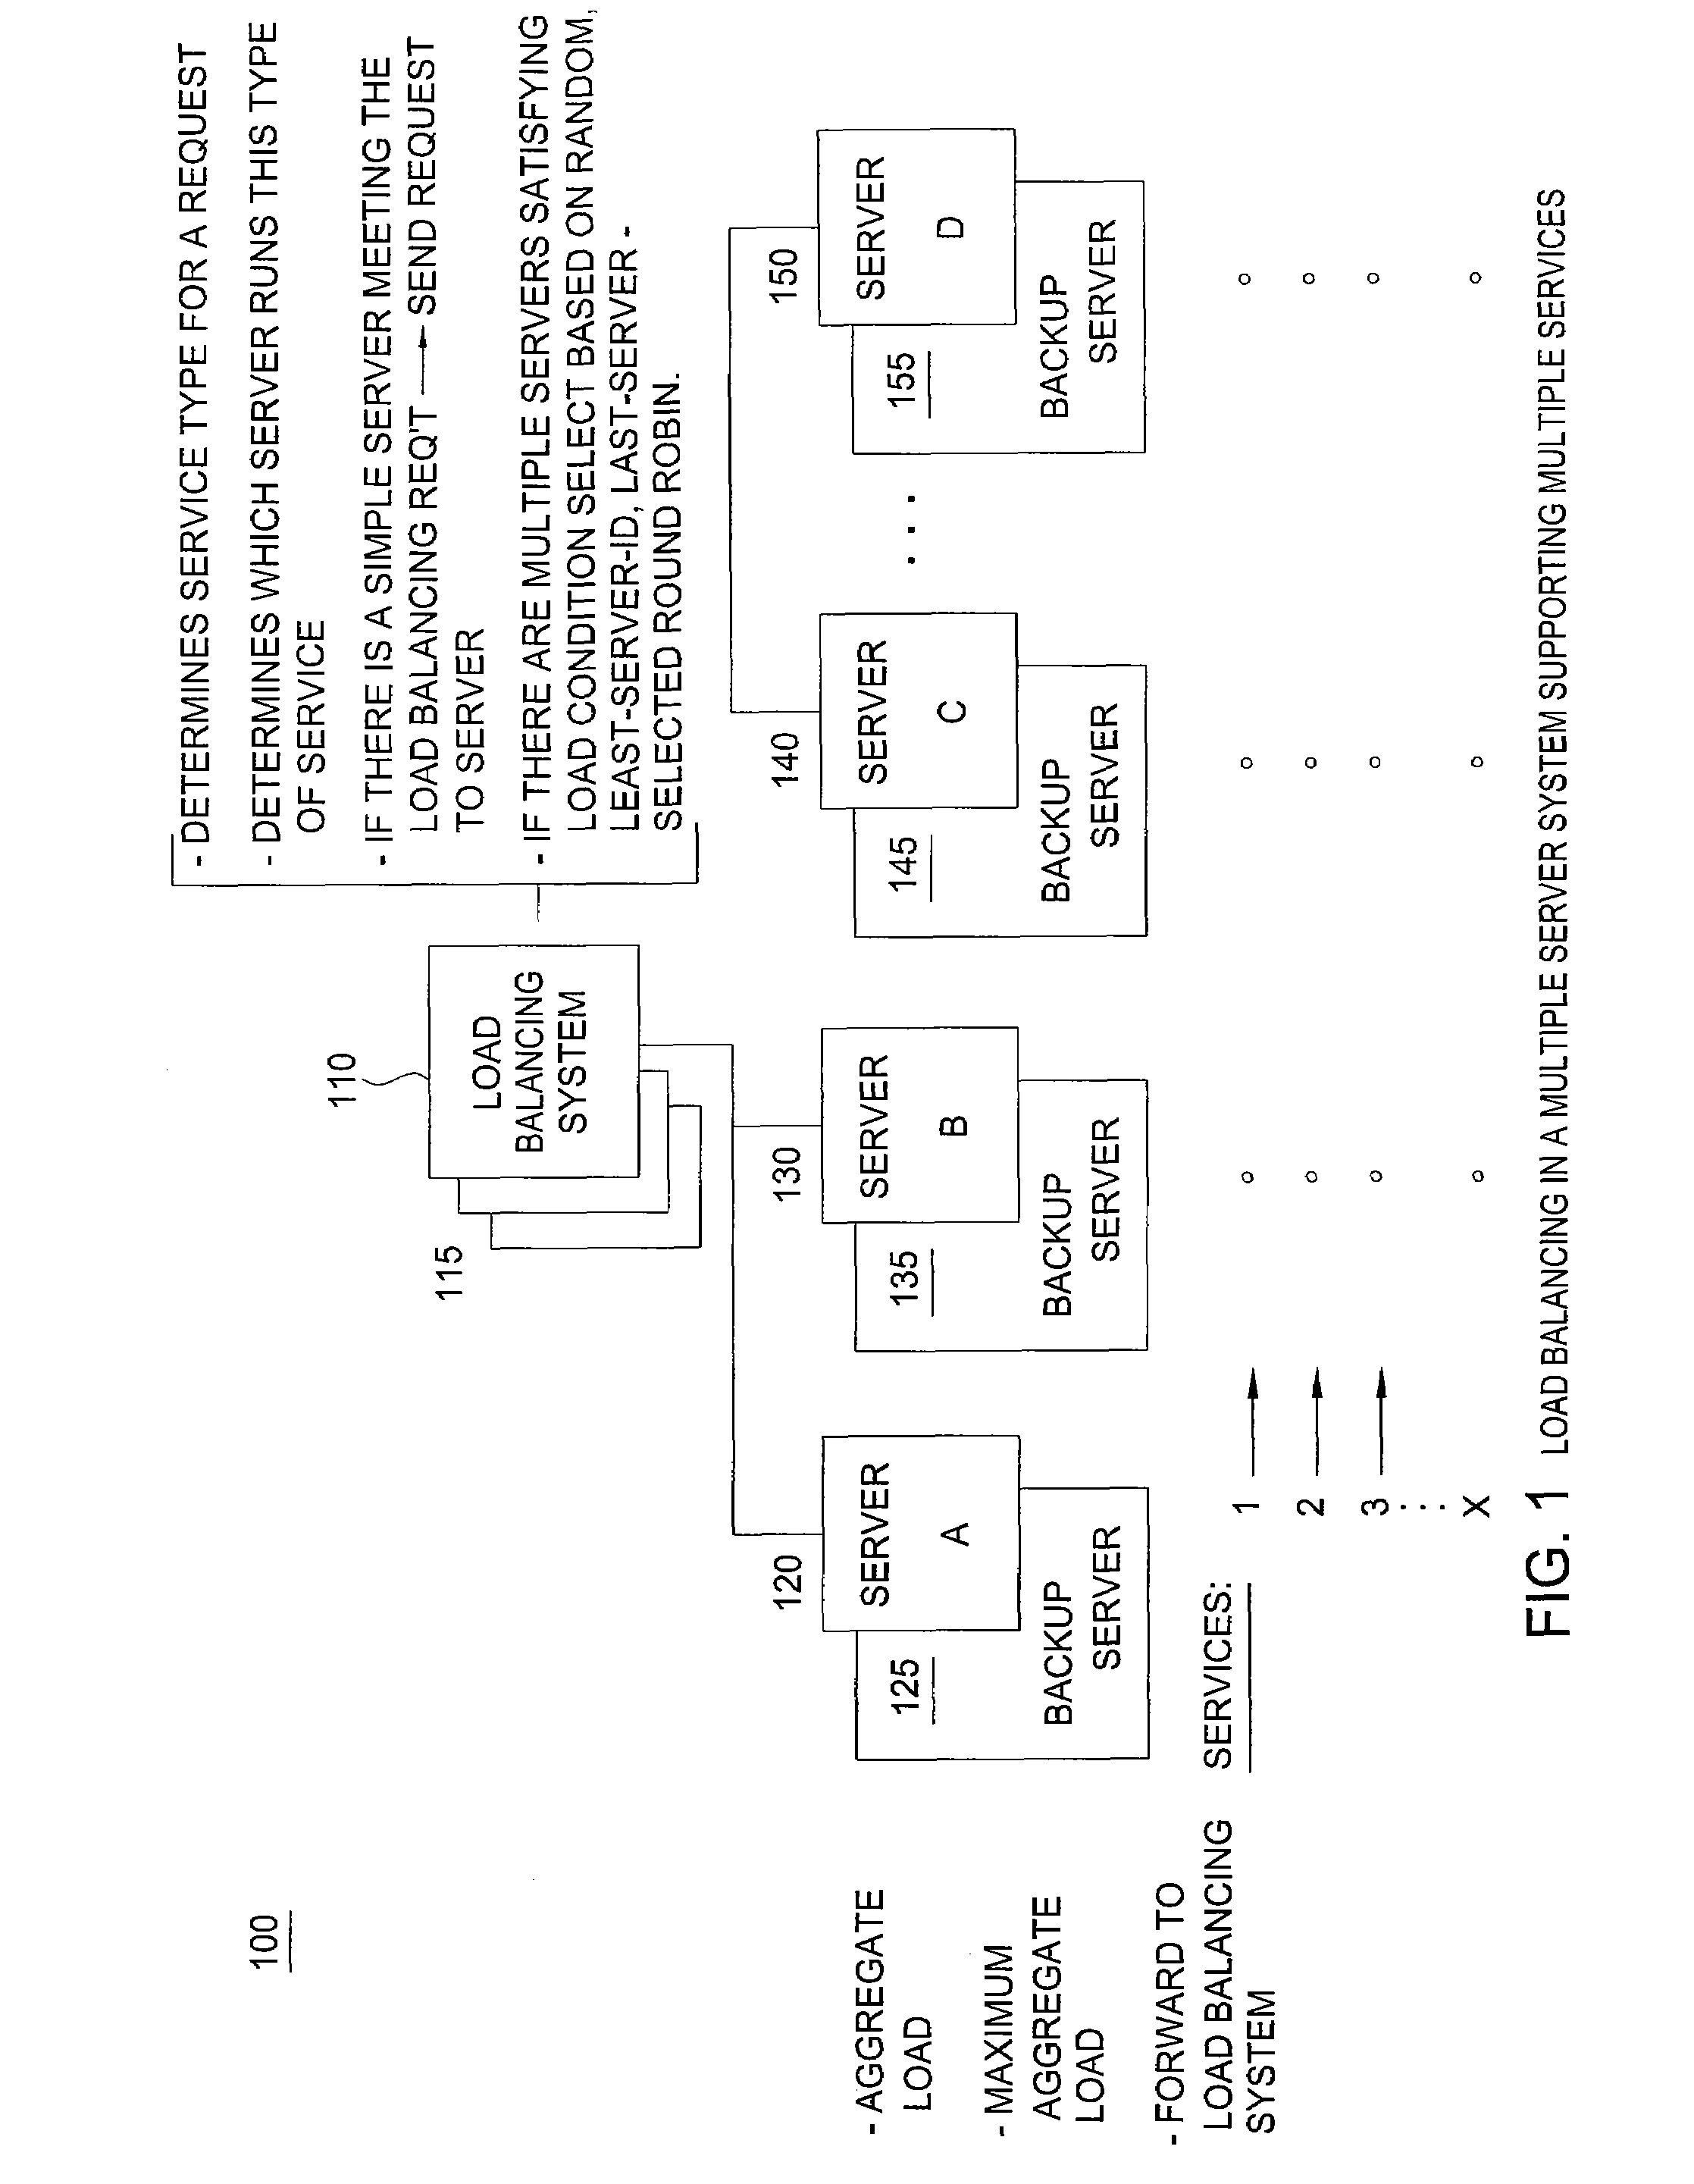 Load Balancing in a Multiple Server System Hosting an Array of Services